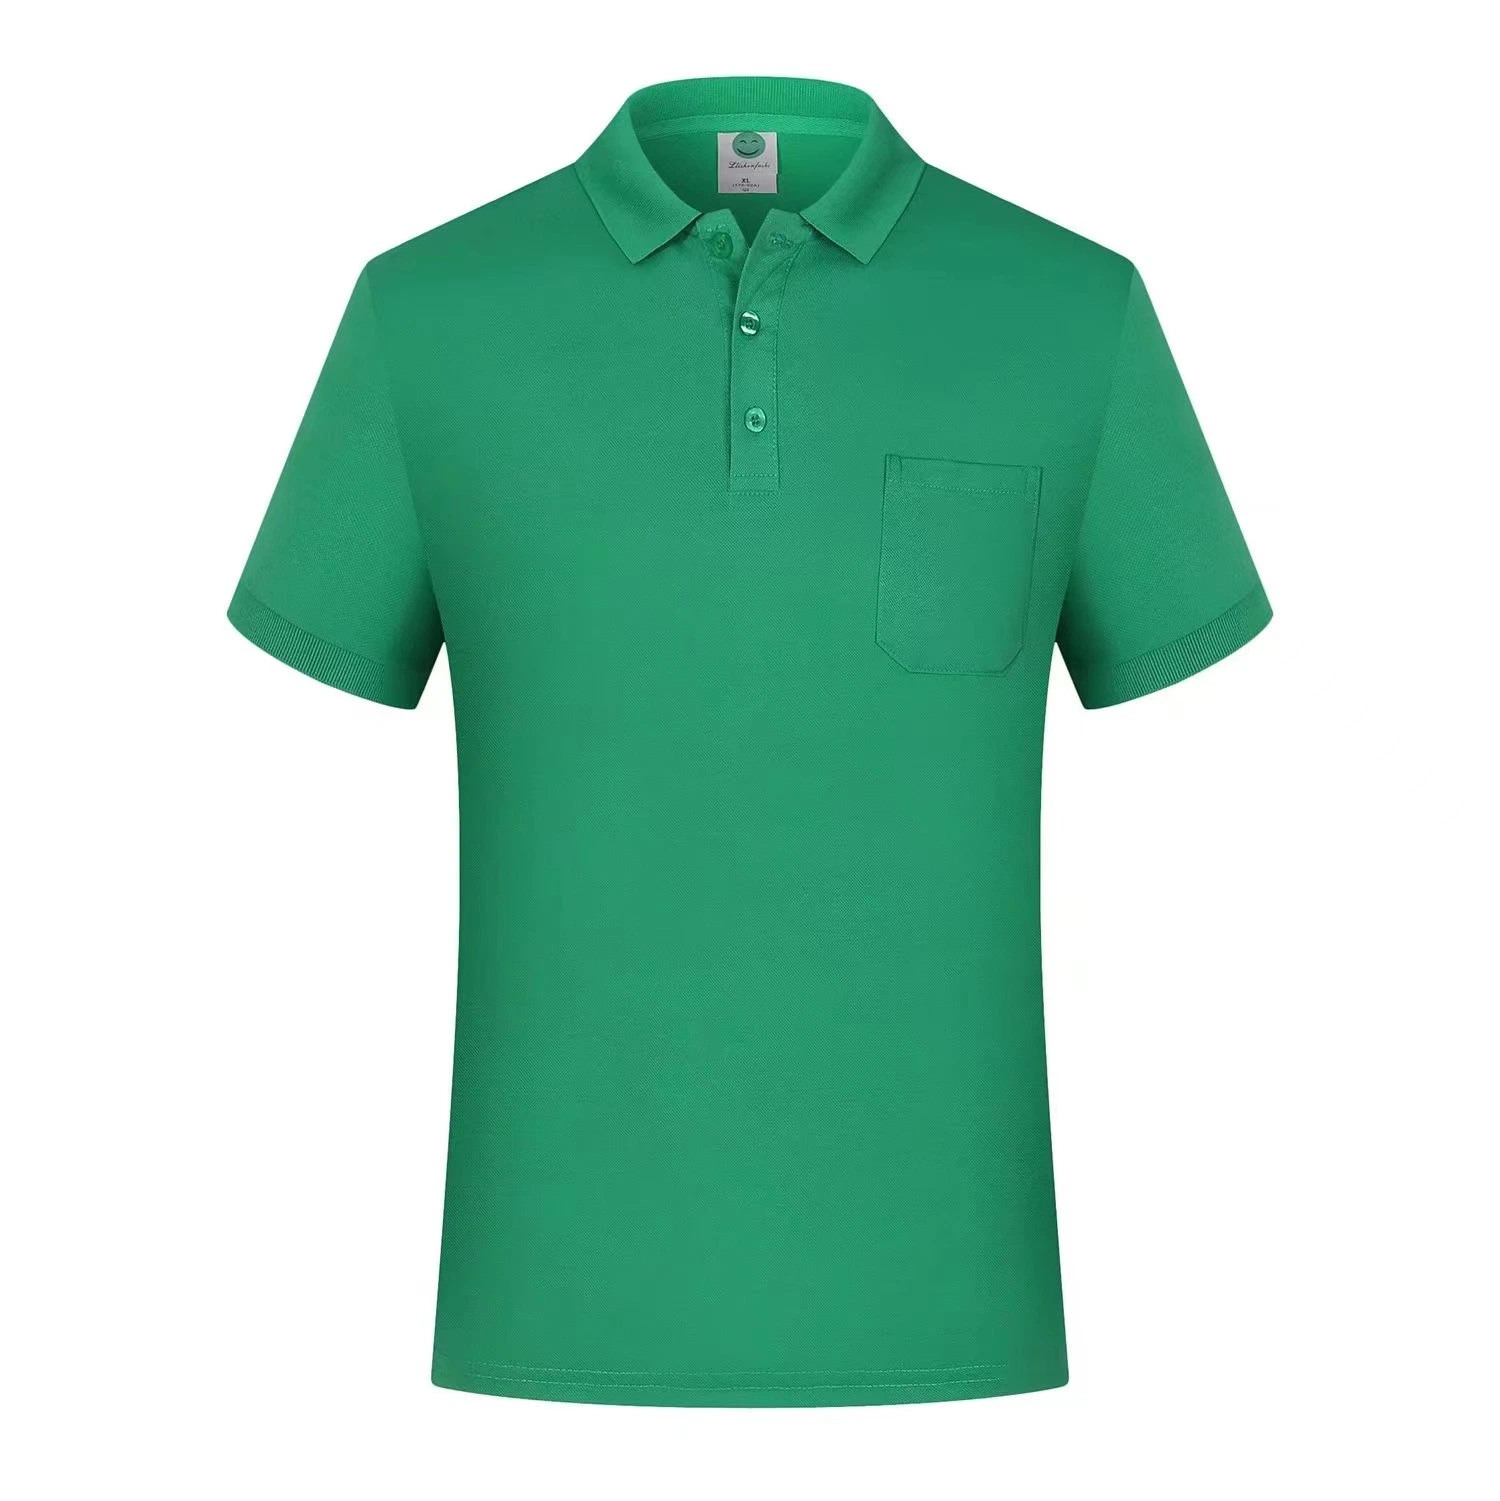 Printing T-Shirt Work Clothes Unisex Polo Shirt with Pocket